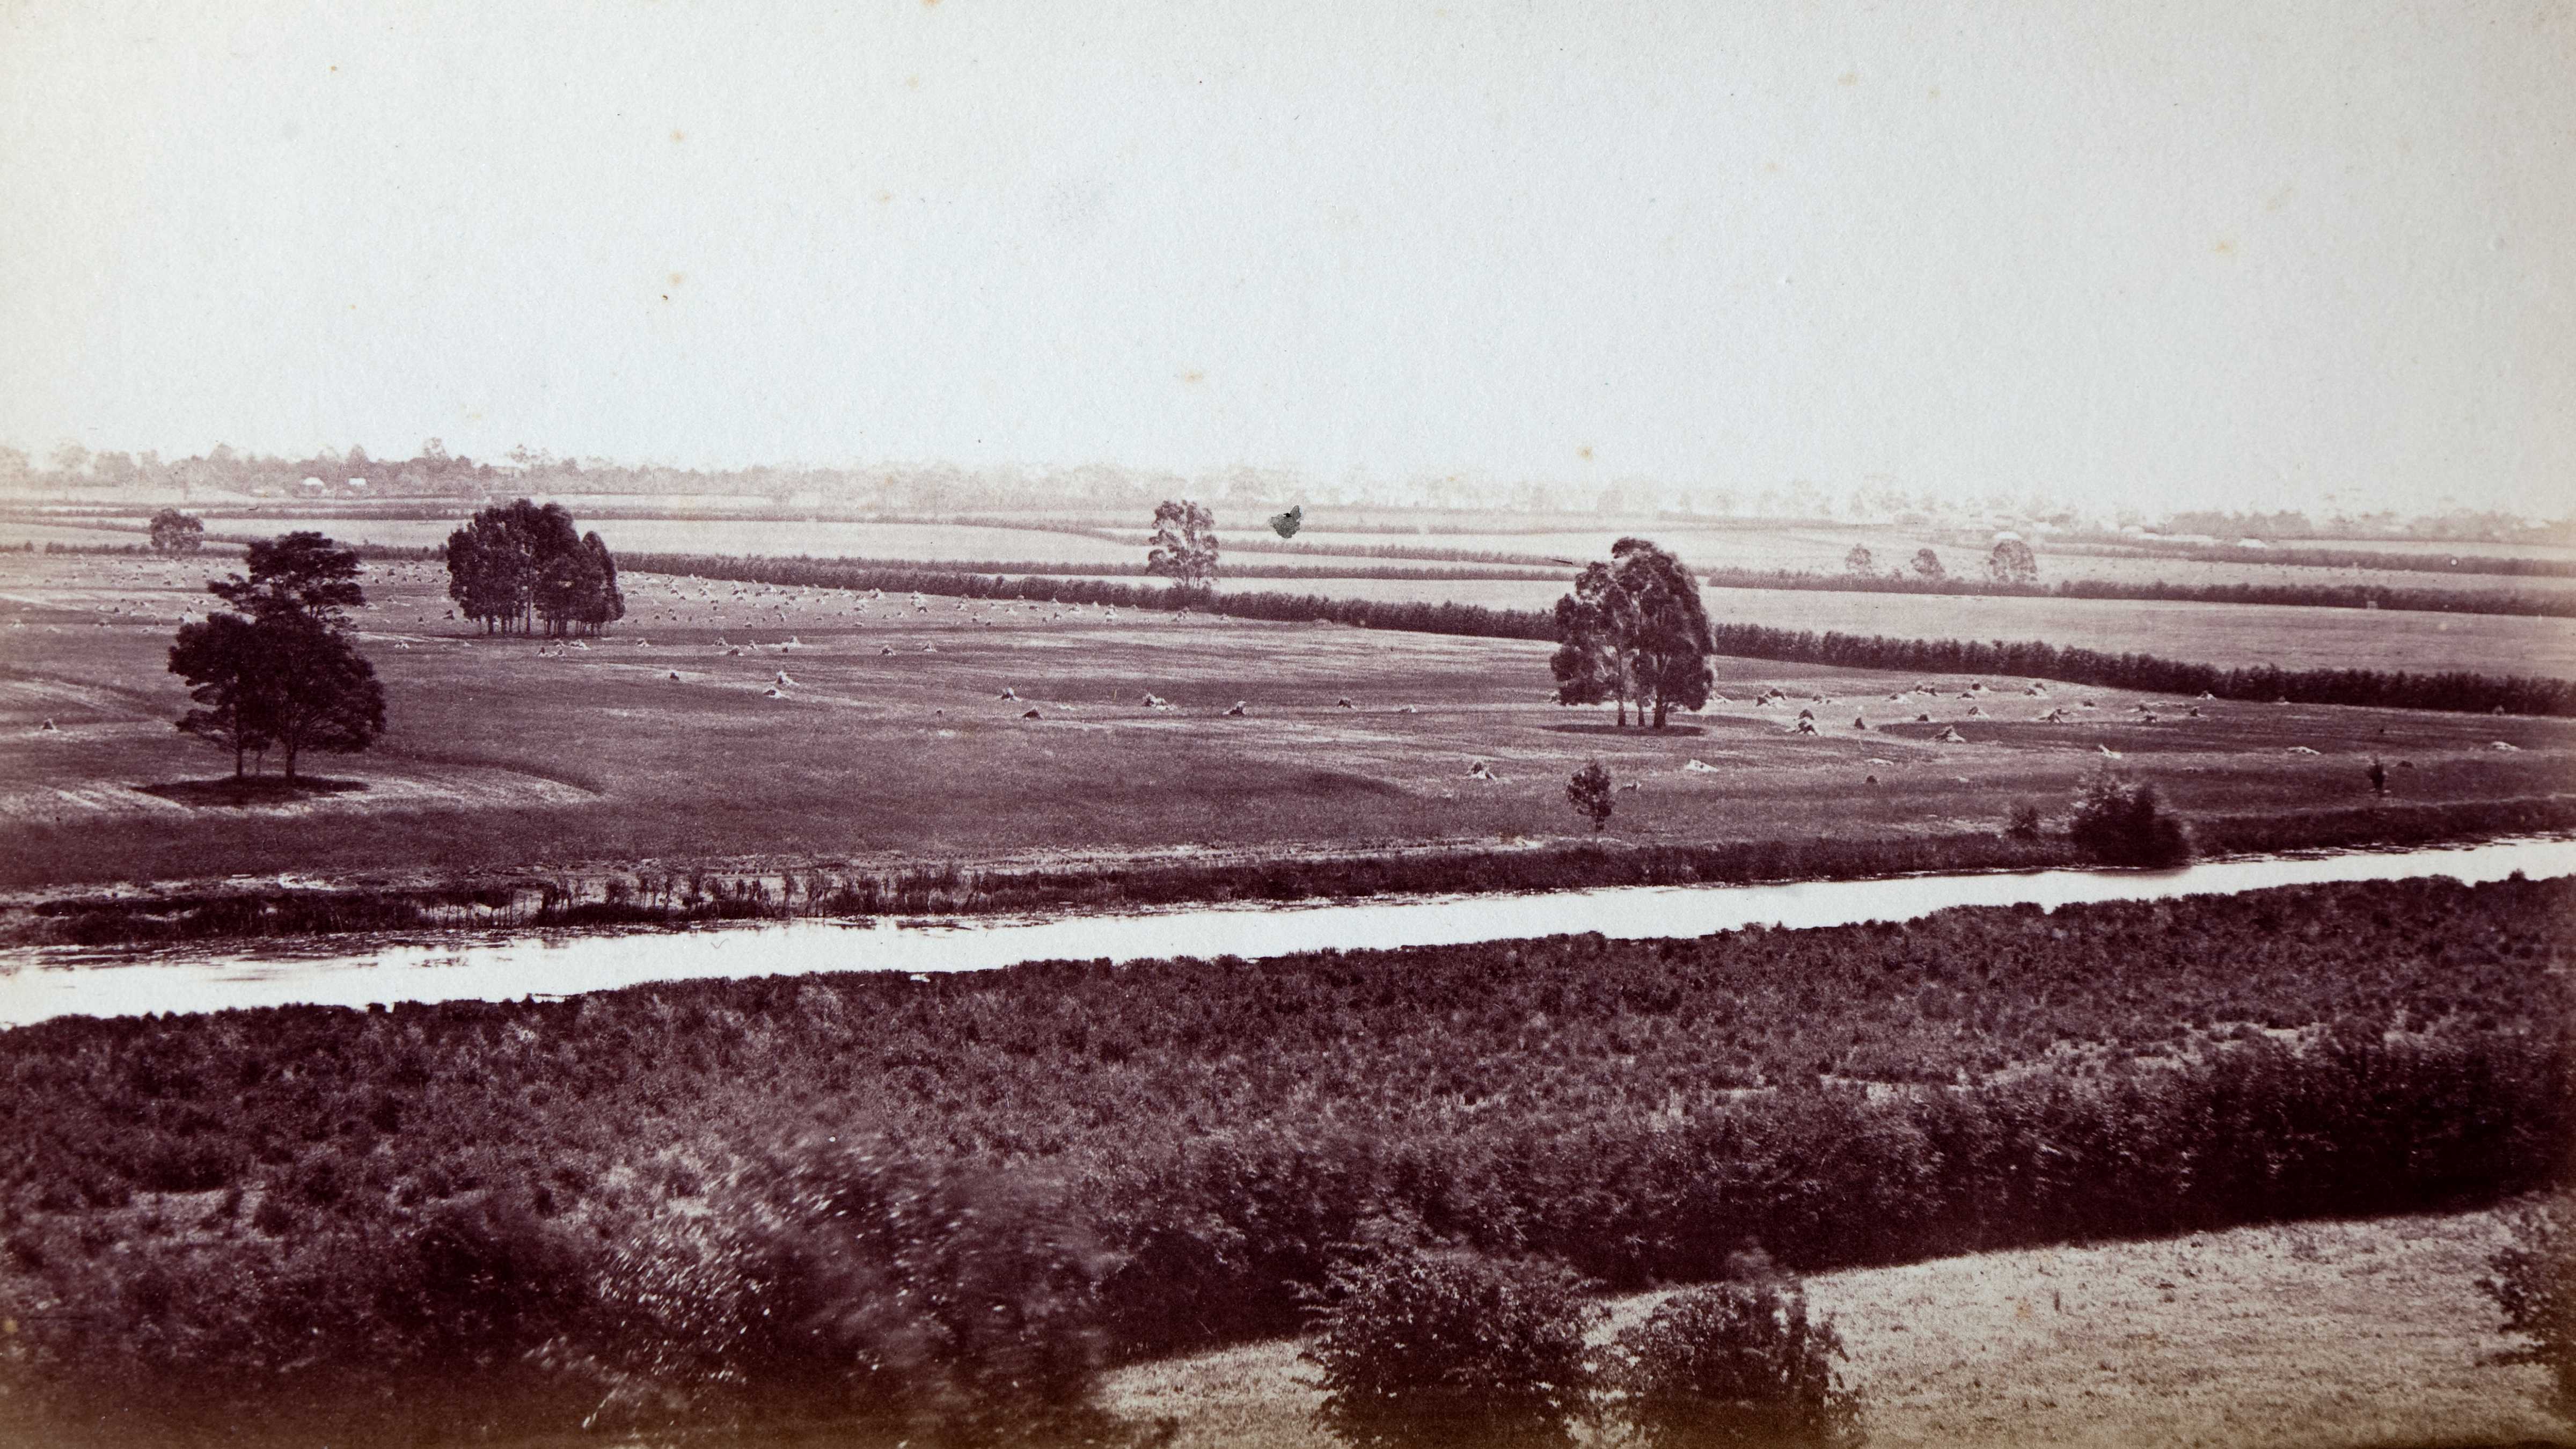 Black and white image of Brickendon fields bordered by hawthorn hedgerows and the Lake River in the foreground. Small stooks of harvested crops and trees are scattered throughout the paddocks and the riverbank is lined with tussocks. Source: Brickendon Estate Archives.